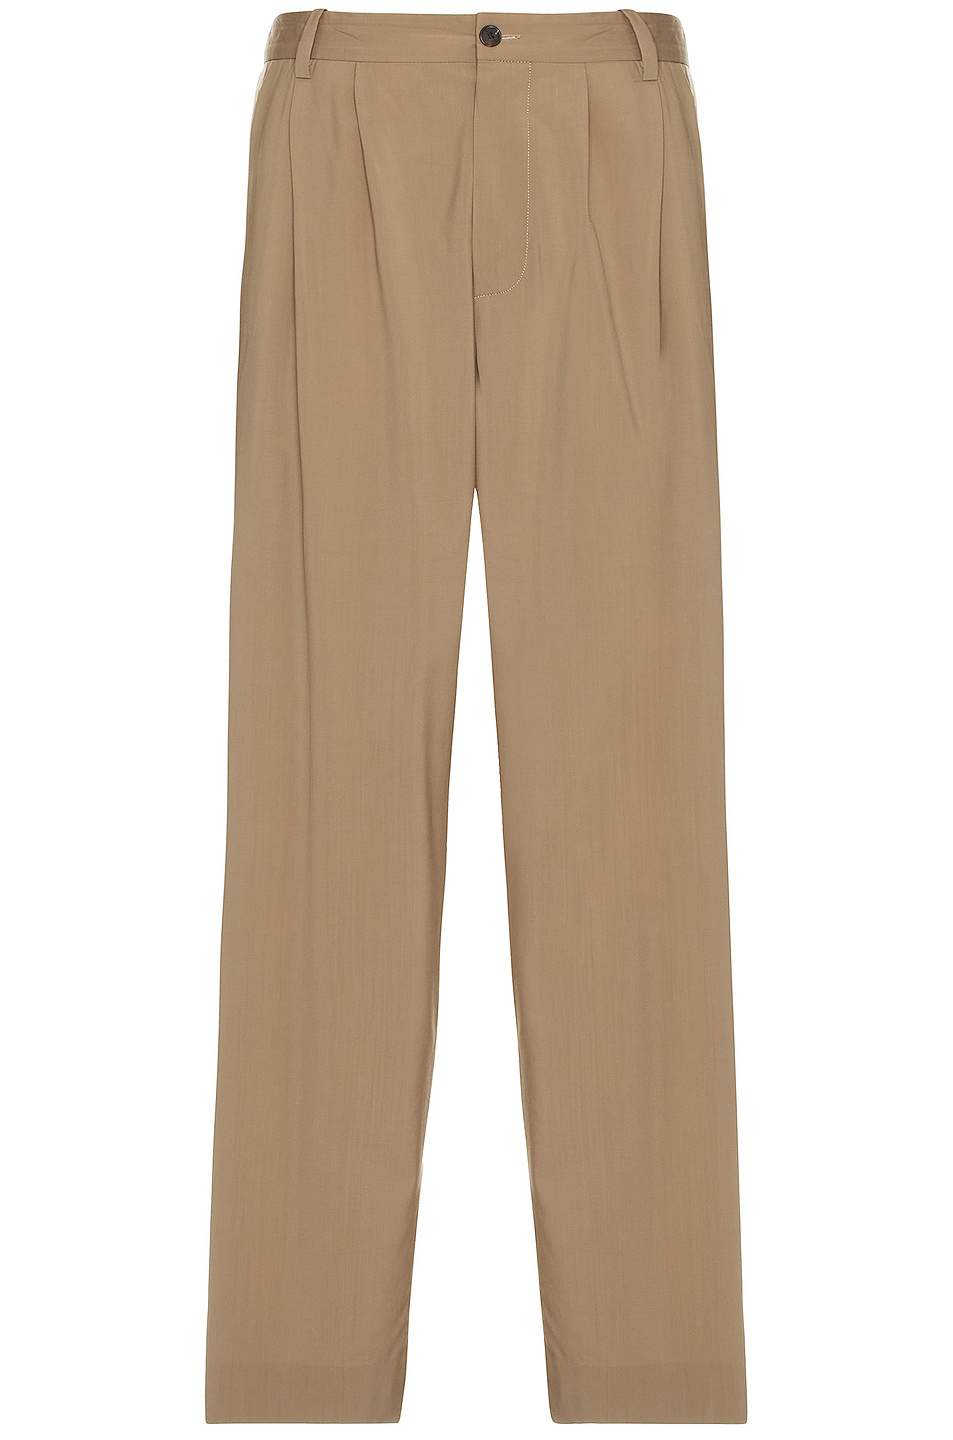 Image 1 of The Row Rufus Pants in Toffee